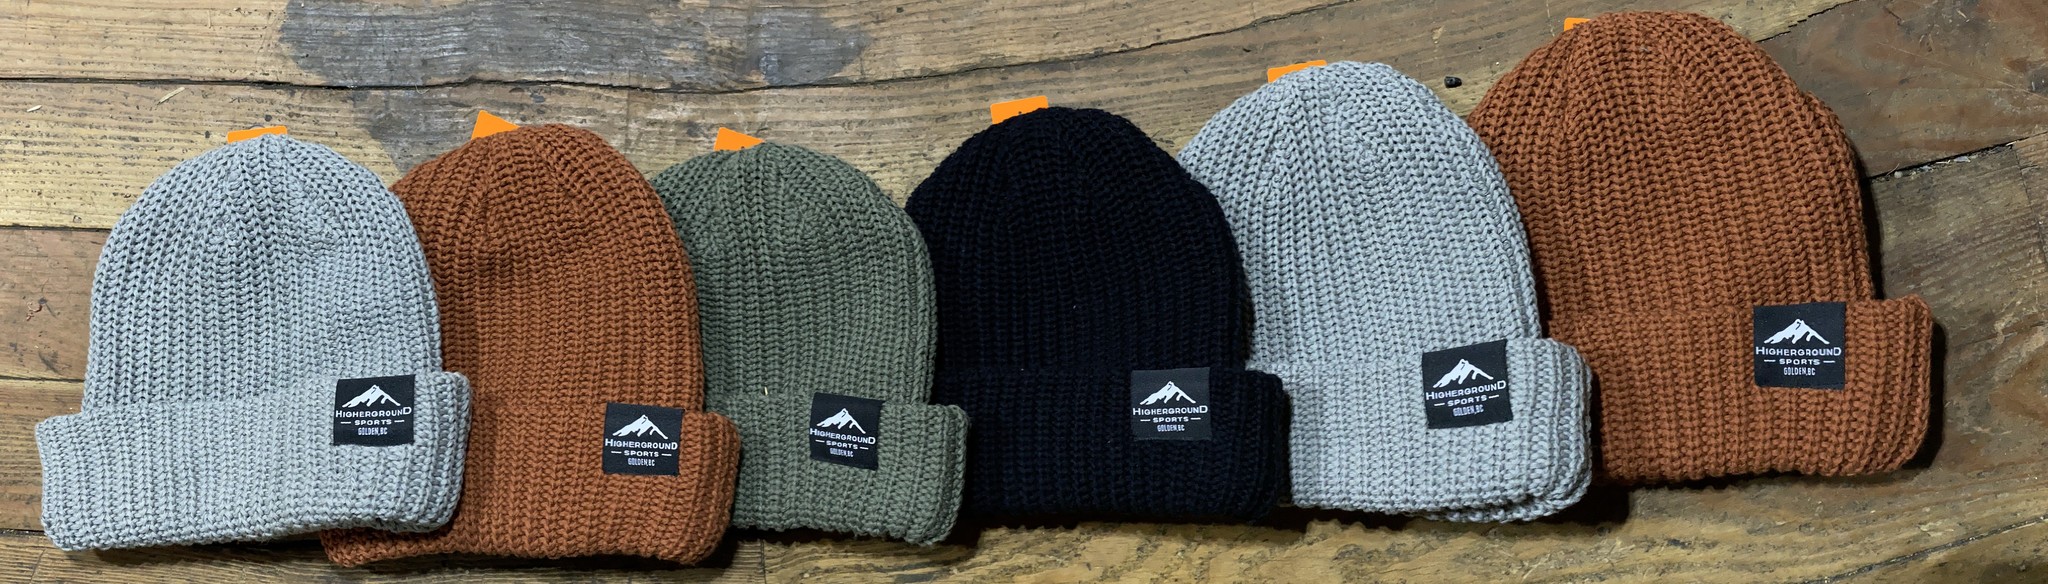 New Higher Ground Toques...